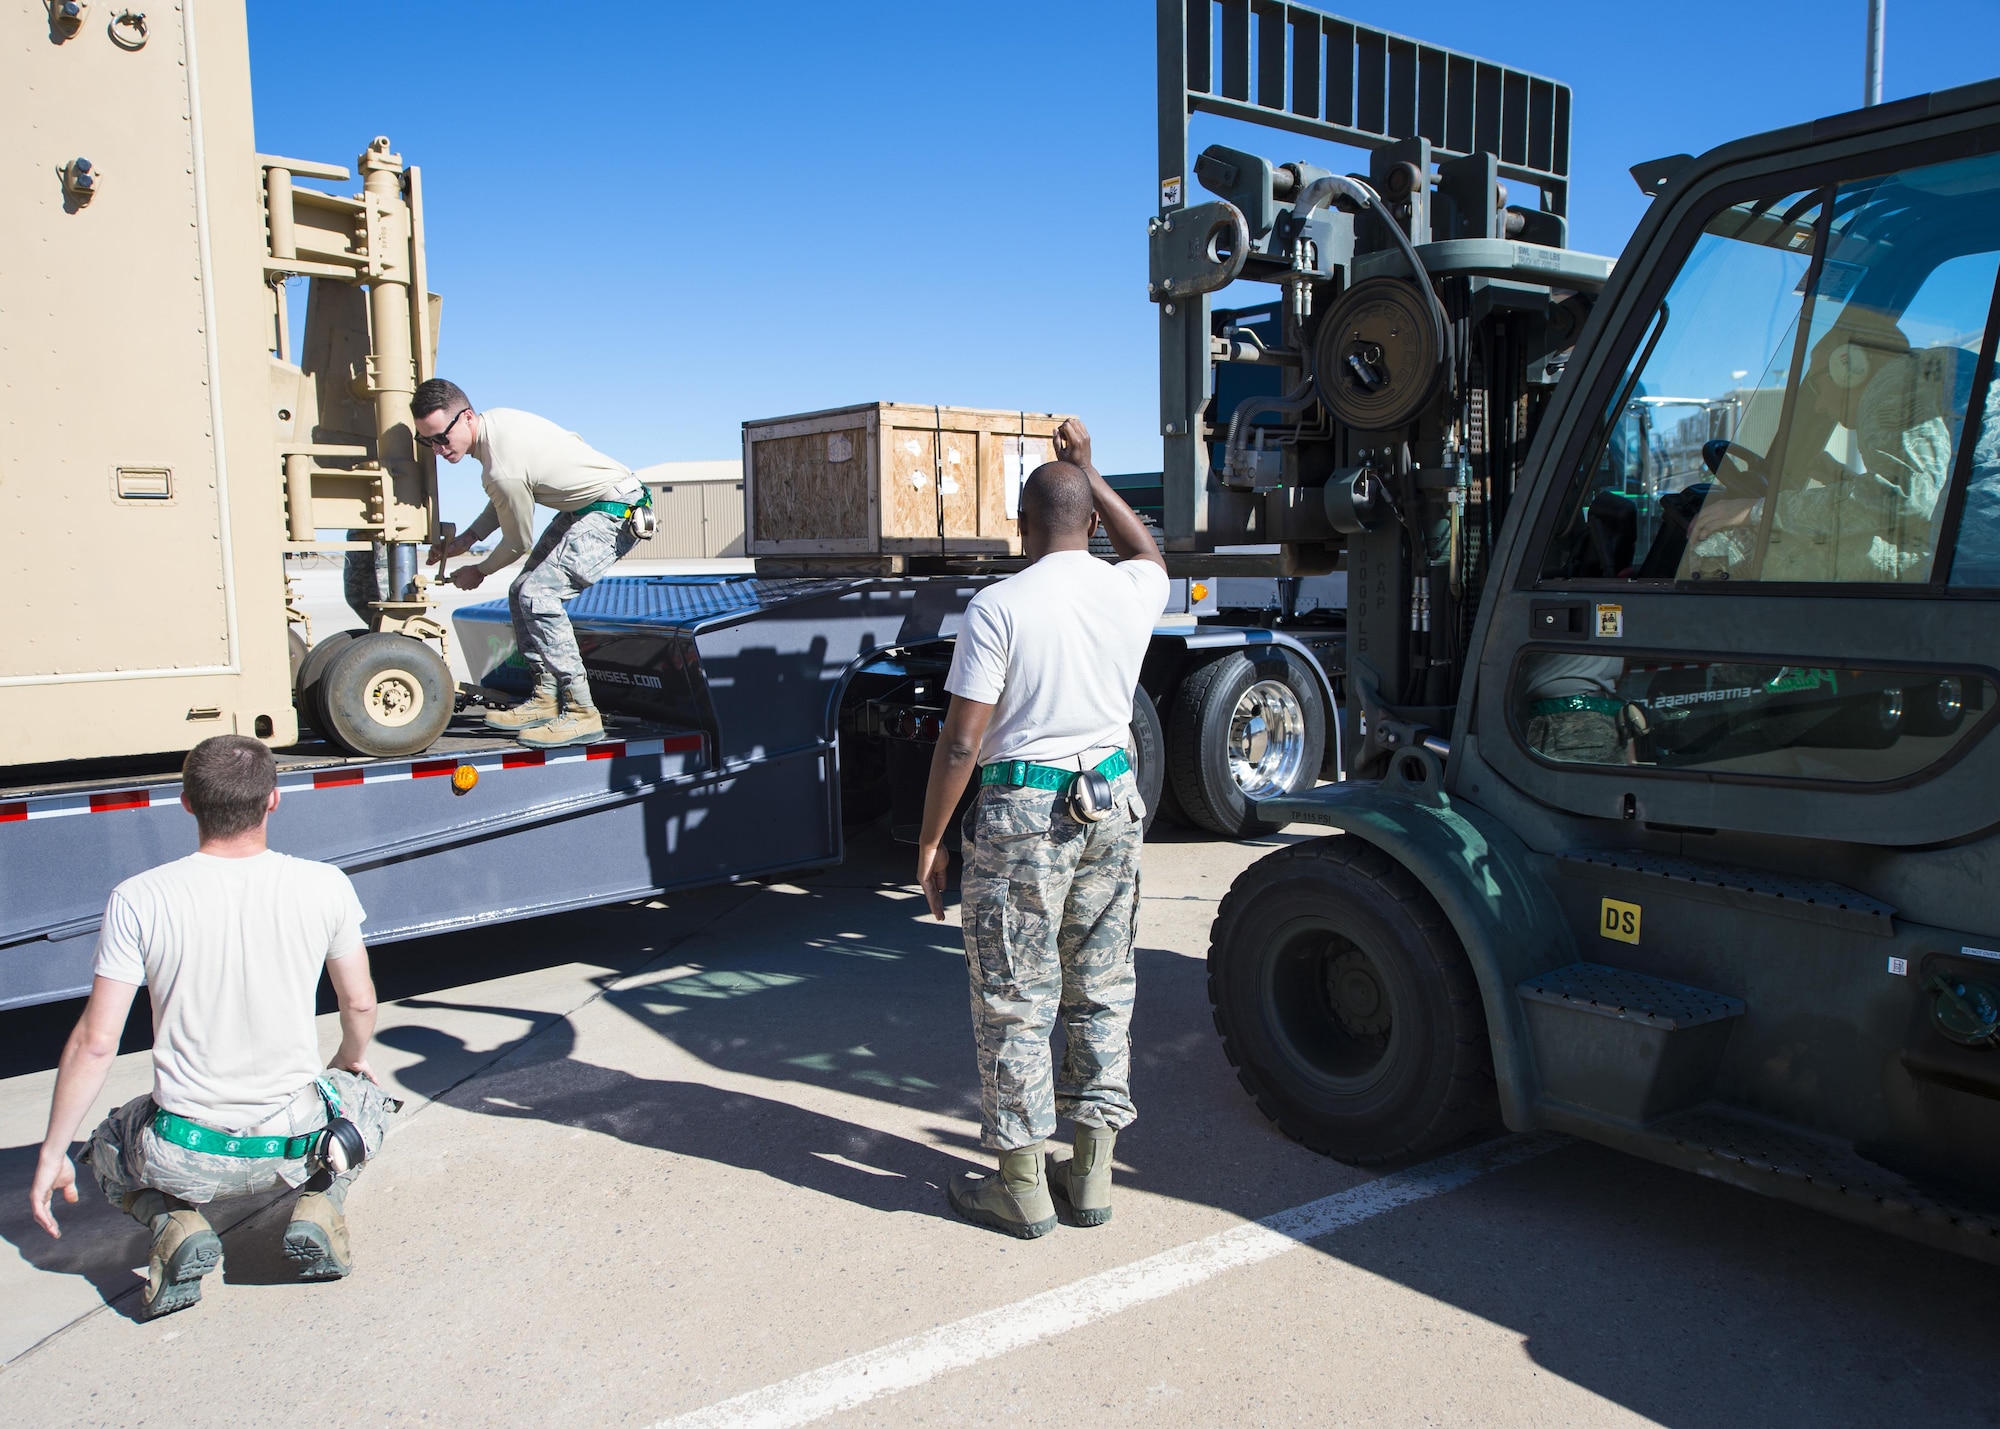 Aircraft communications maintenance technicians from the 49th Aircraft Maintenance Squadron here unload a new Ground Control Station from a delivery truck Nov. 14 at Holloman Air Force Base, N.M. The delivery was the first of 15 new GCSs to be delivered as part of an Air Force-wide initiative to replace current Remotely Piloted Aircraft mission systems. (U.S. Air Force photo by Senior Airman Emily Kenney)